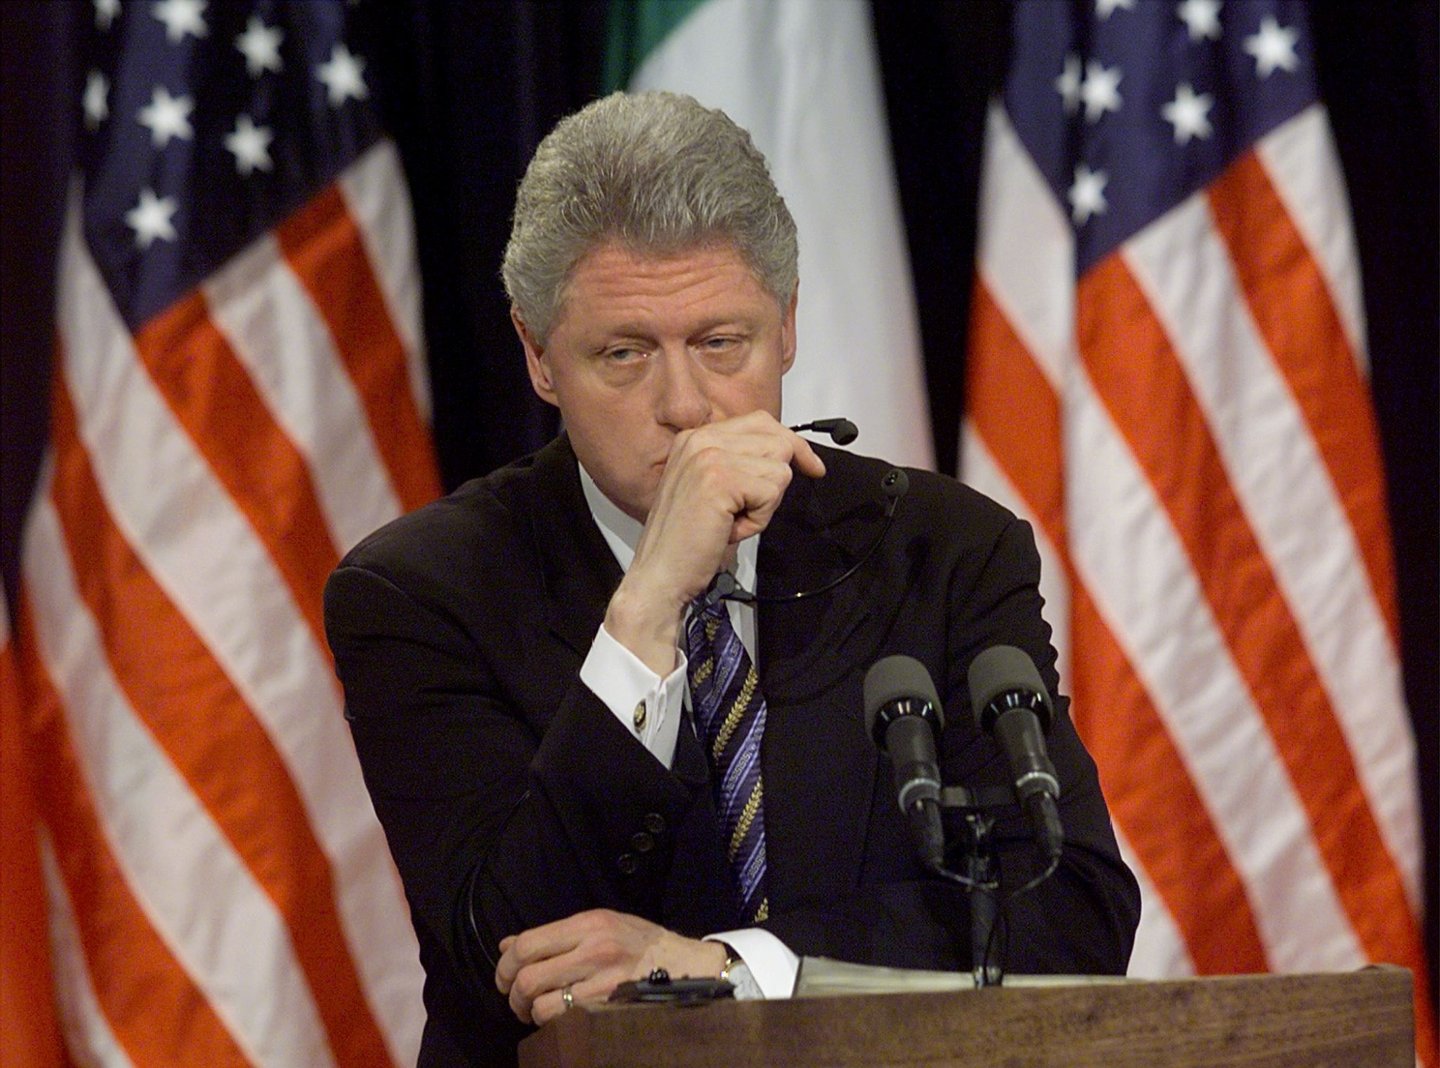 WASHINGTON, : US President Bill Clinton pauses a moment while being asked about former White House intern Monica Lewinsky at a joint press conference with Italian Prime Minister Massimo D'Alema 05 March in the White House in Washington, DC. Clinton said he hoped Monica Lewinsky would have "a good life" and get any help she might need to recover from the traumatic White House sex scandal. (ELECTRONIC IMAGE) AFP PHOTO/Stephen JAFFE (Photo credit should read STEPHEN JAFFE/AFP/Getty Images)